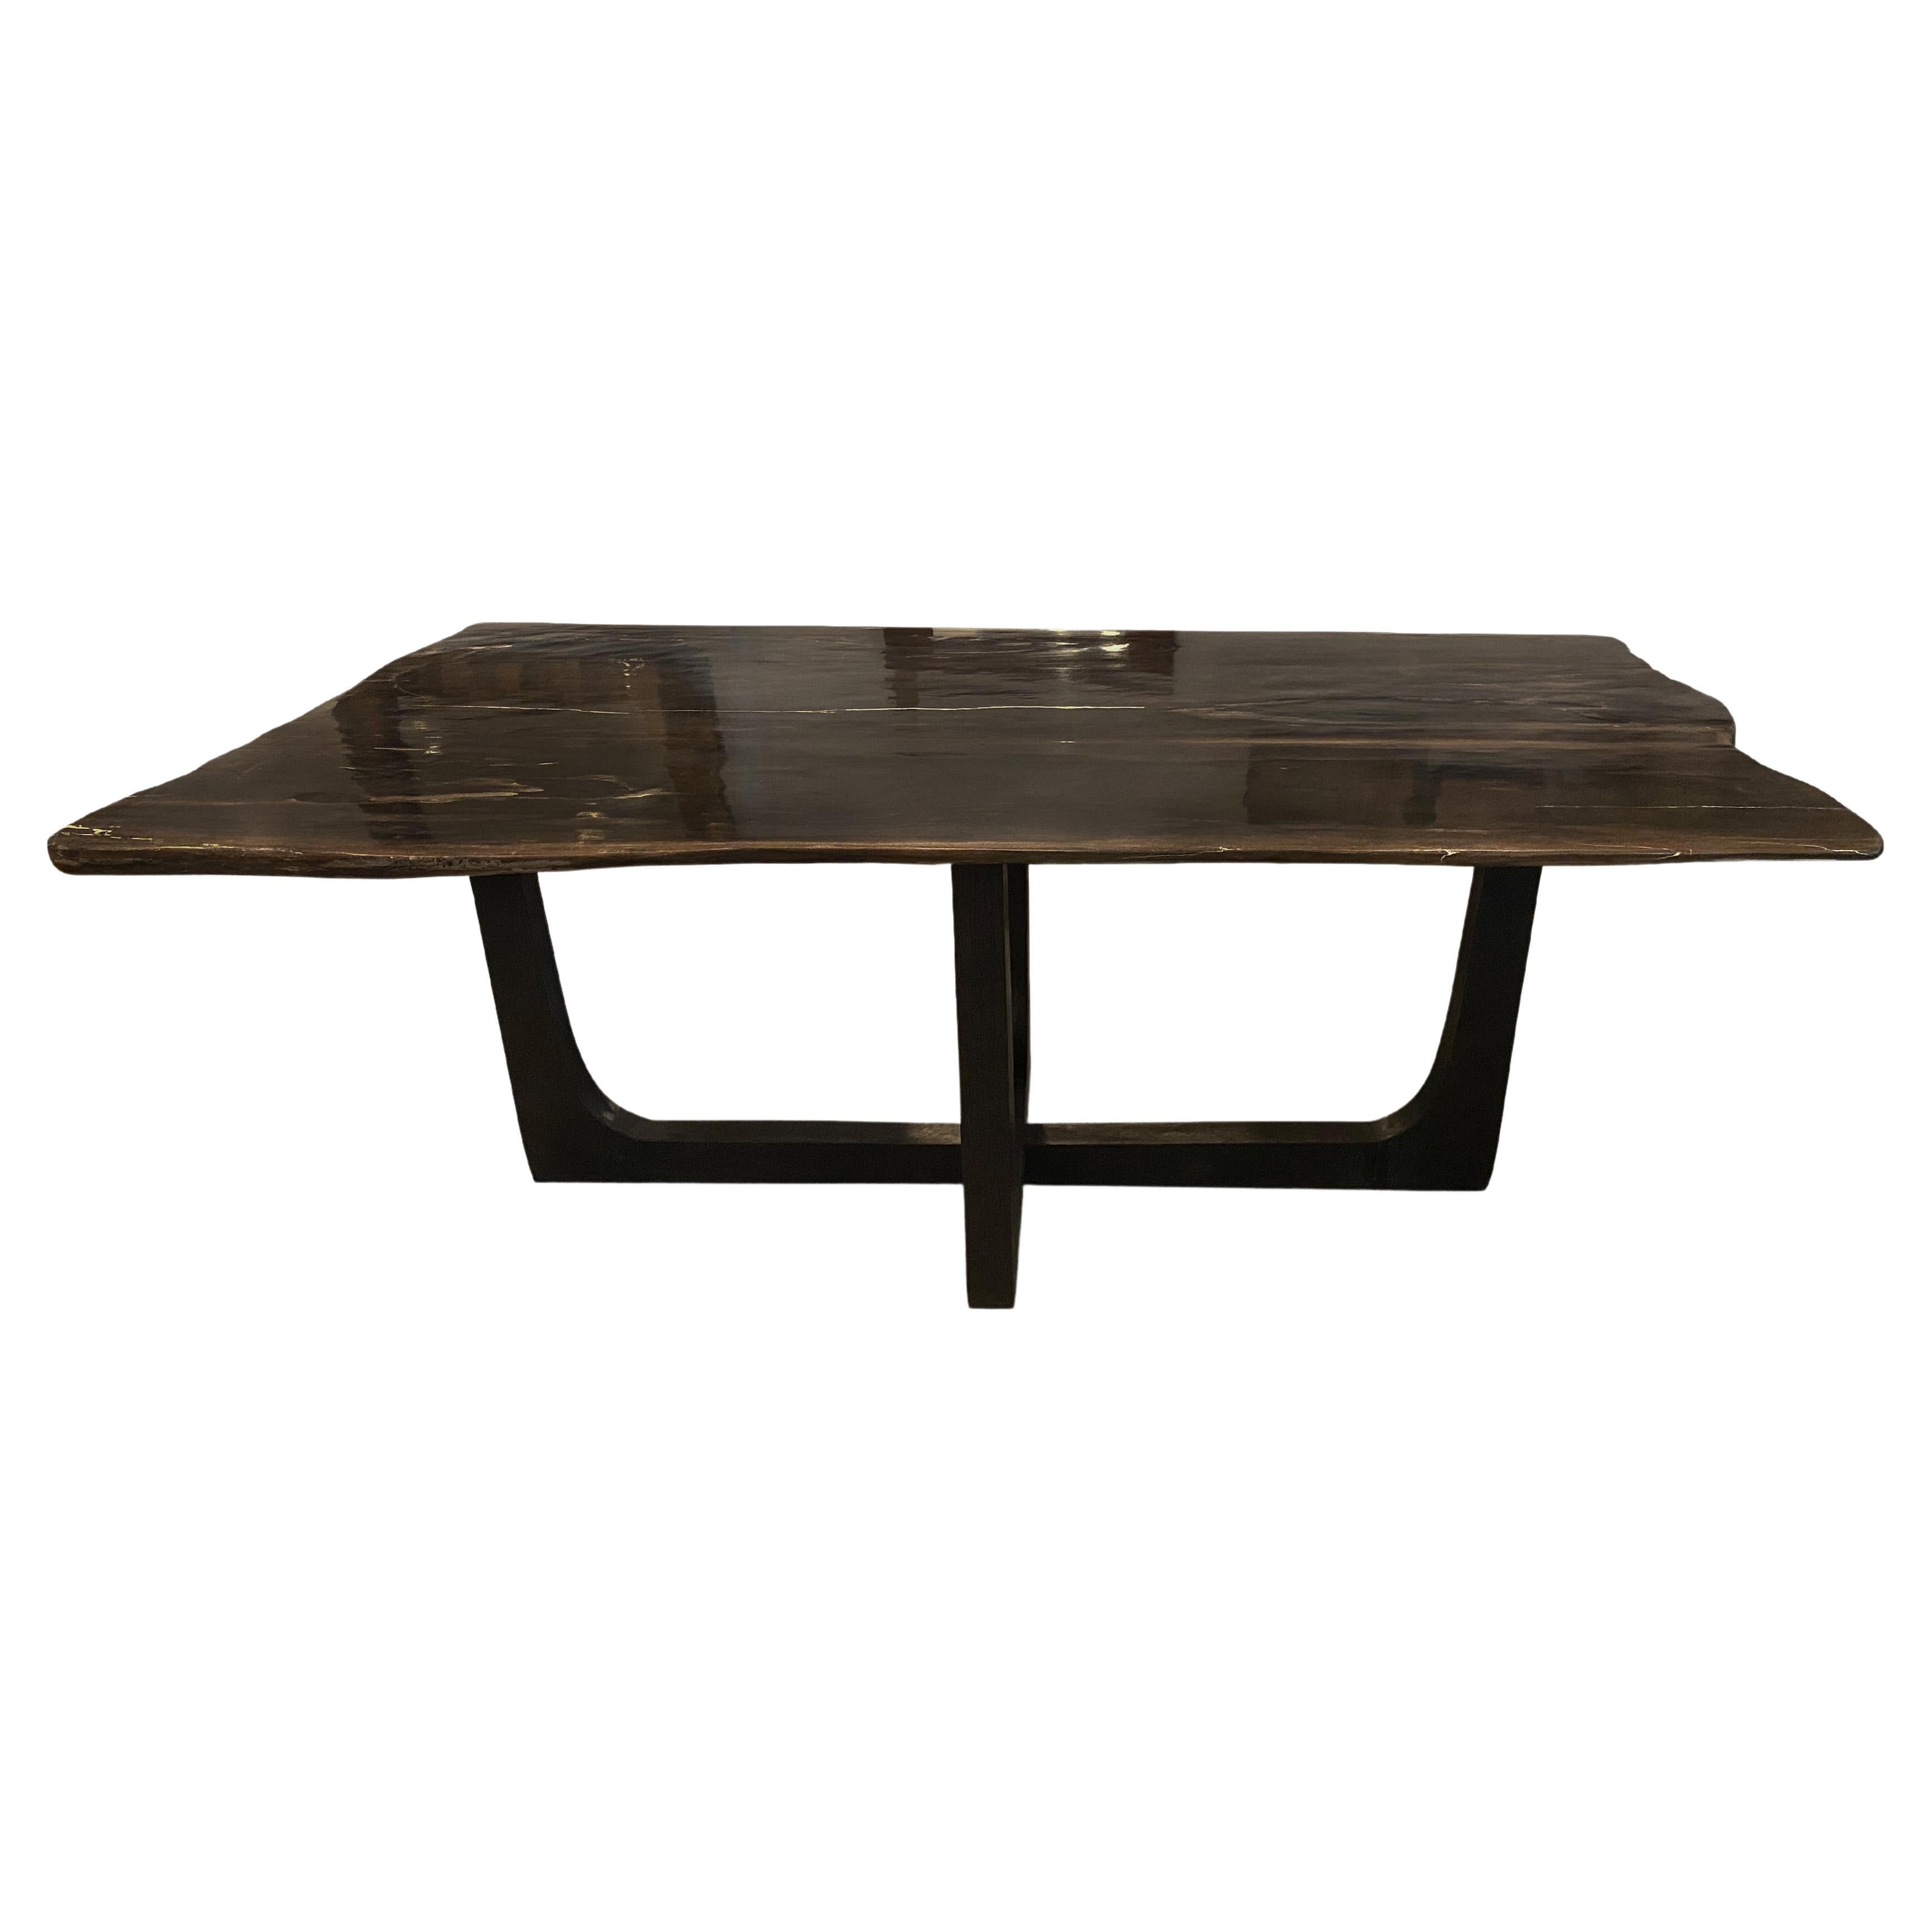 Andrianna Shamaris Live Edge Super Smooth Petrified Wood Dining Table For Sale